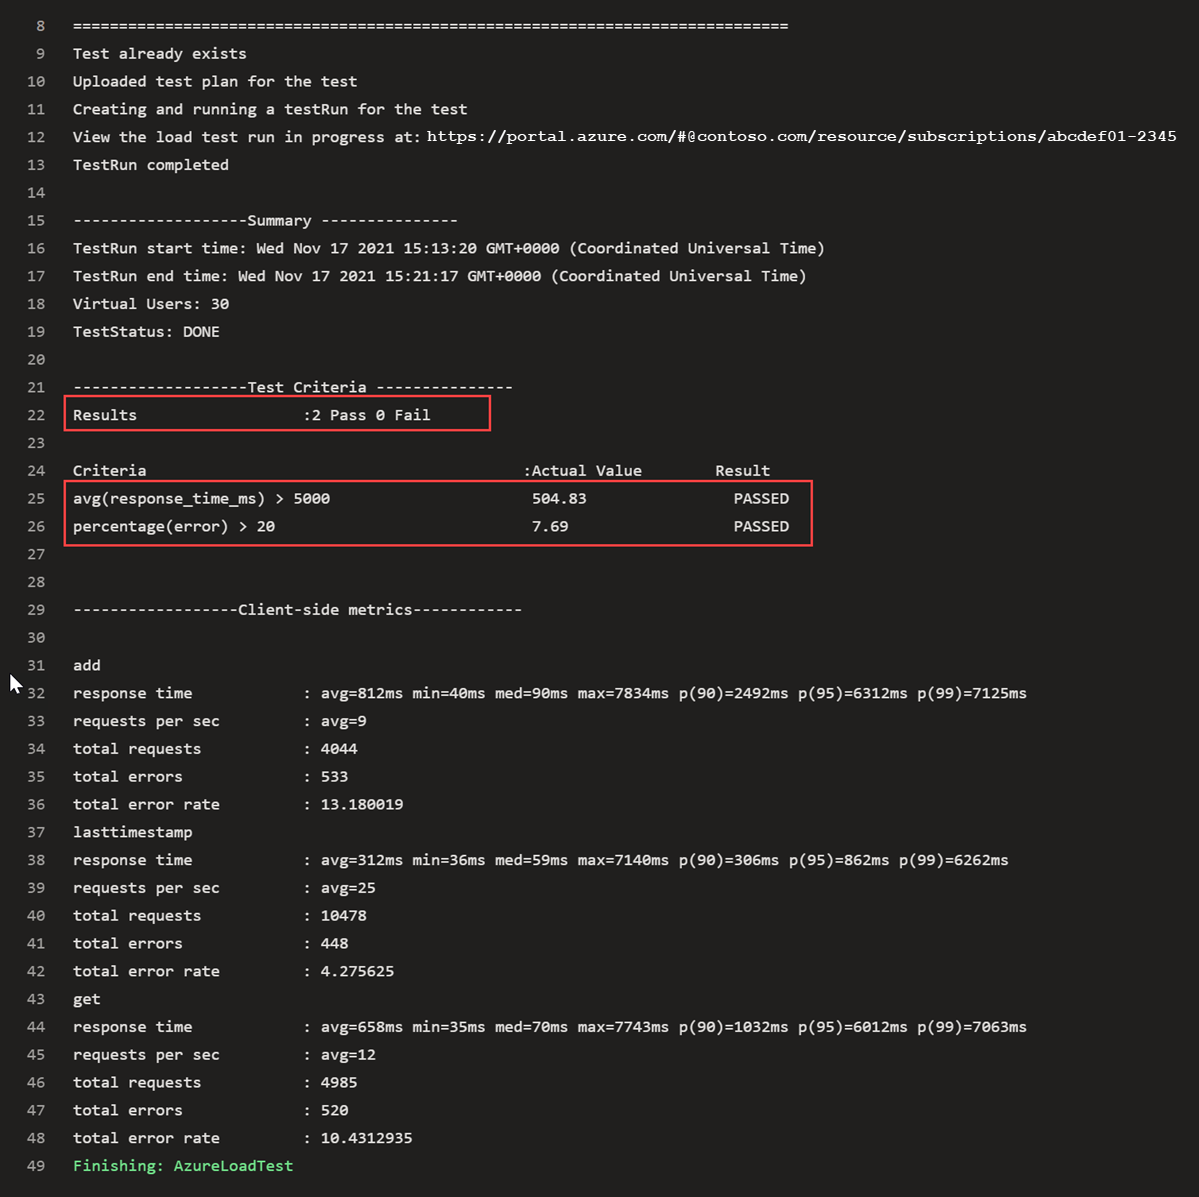 Screenshot that shows pipeline logs after all test criteria pass.